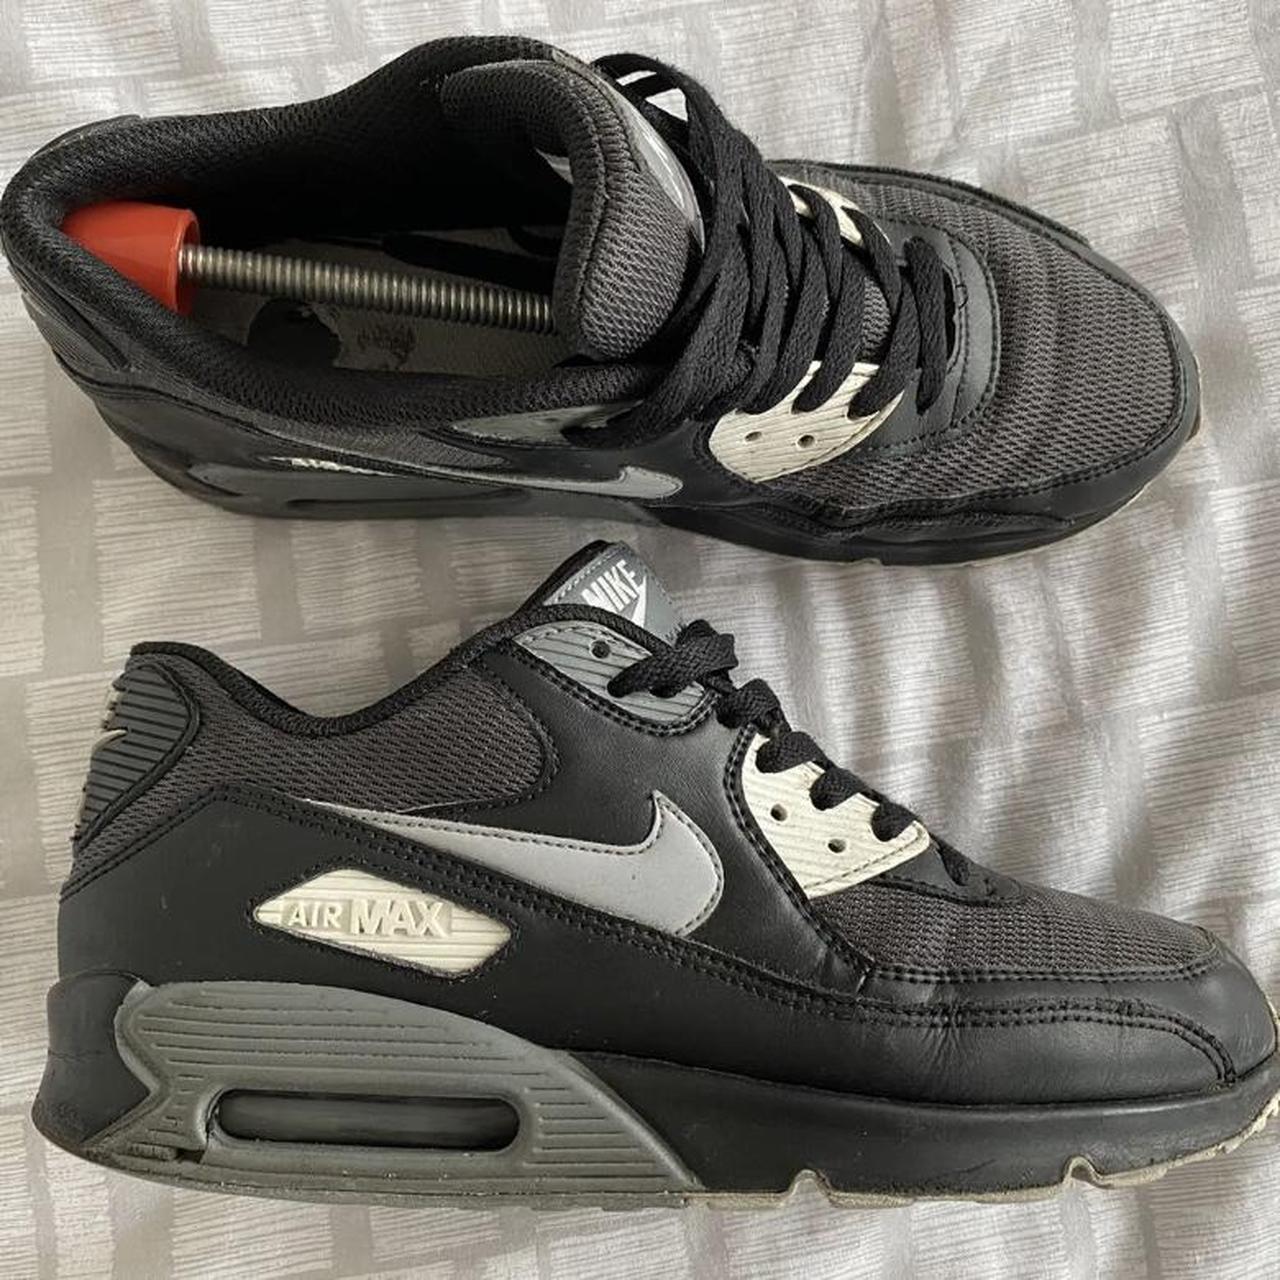 Nike Airmax 90s Size 7 In good condition, wear and... - Depop